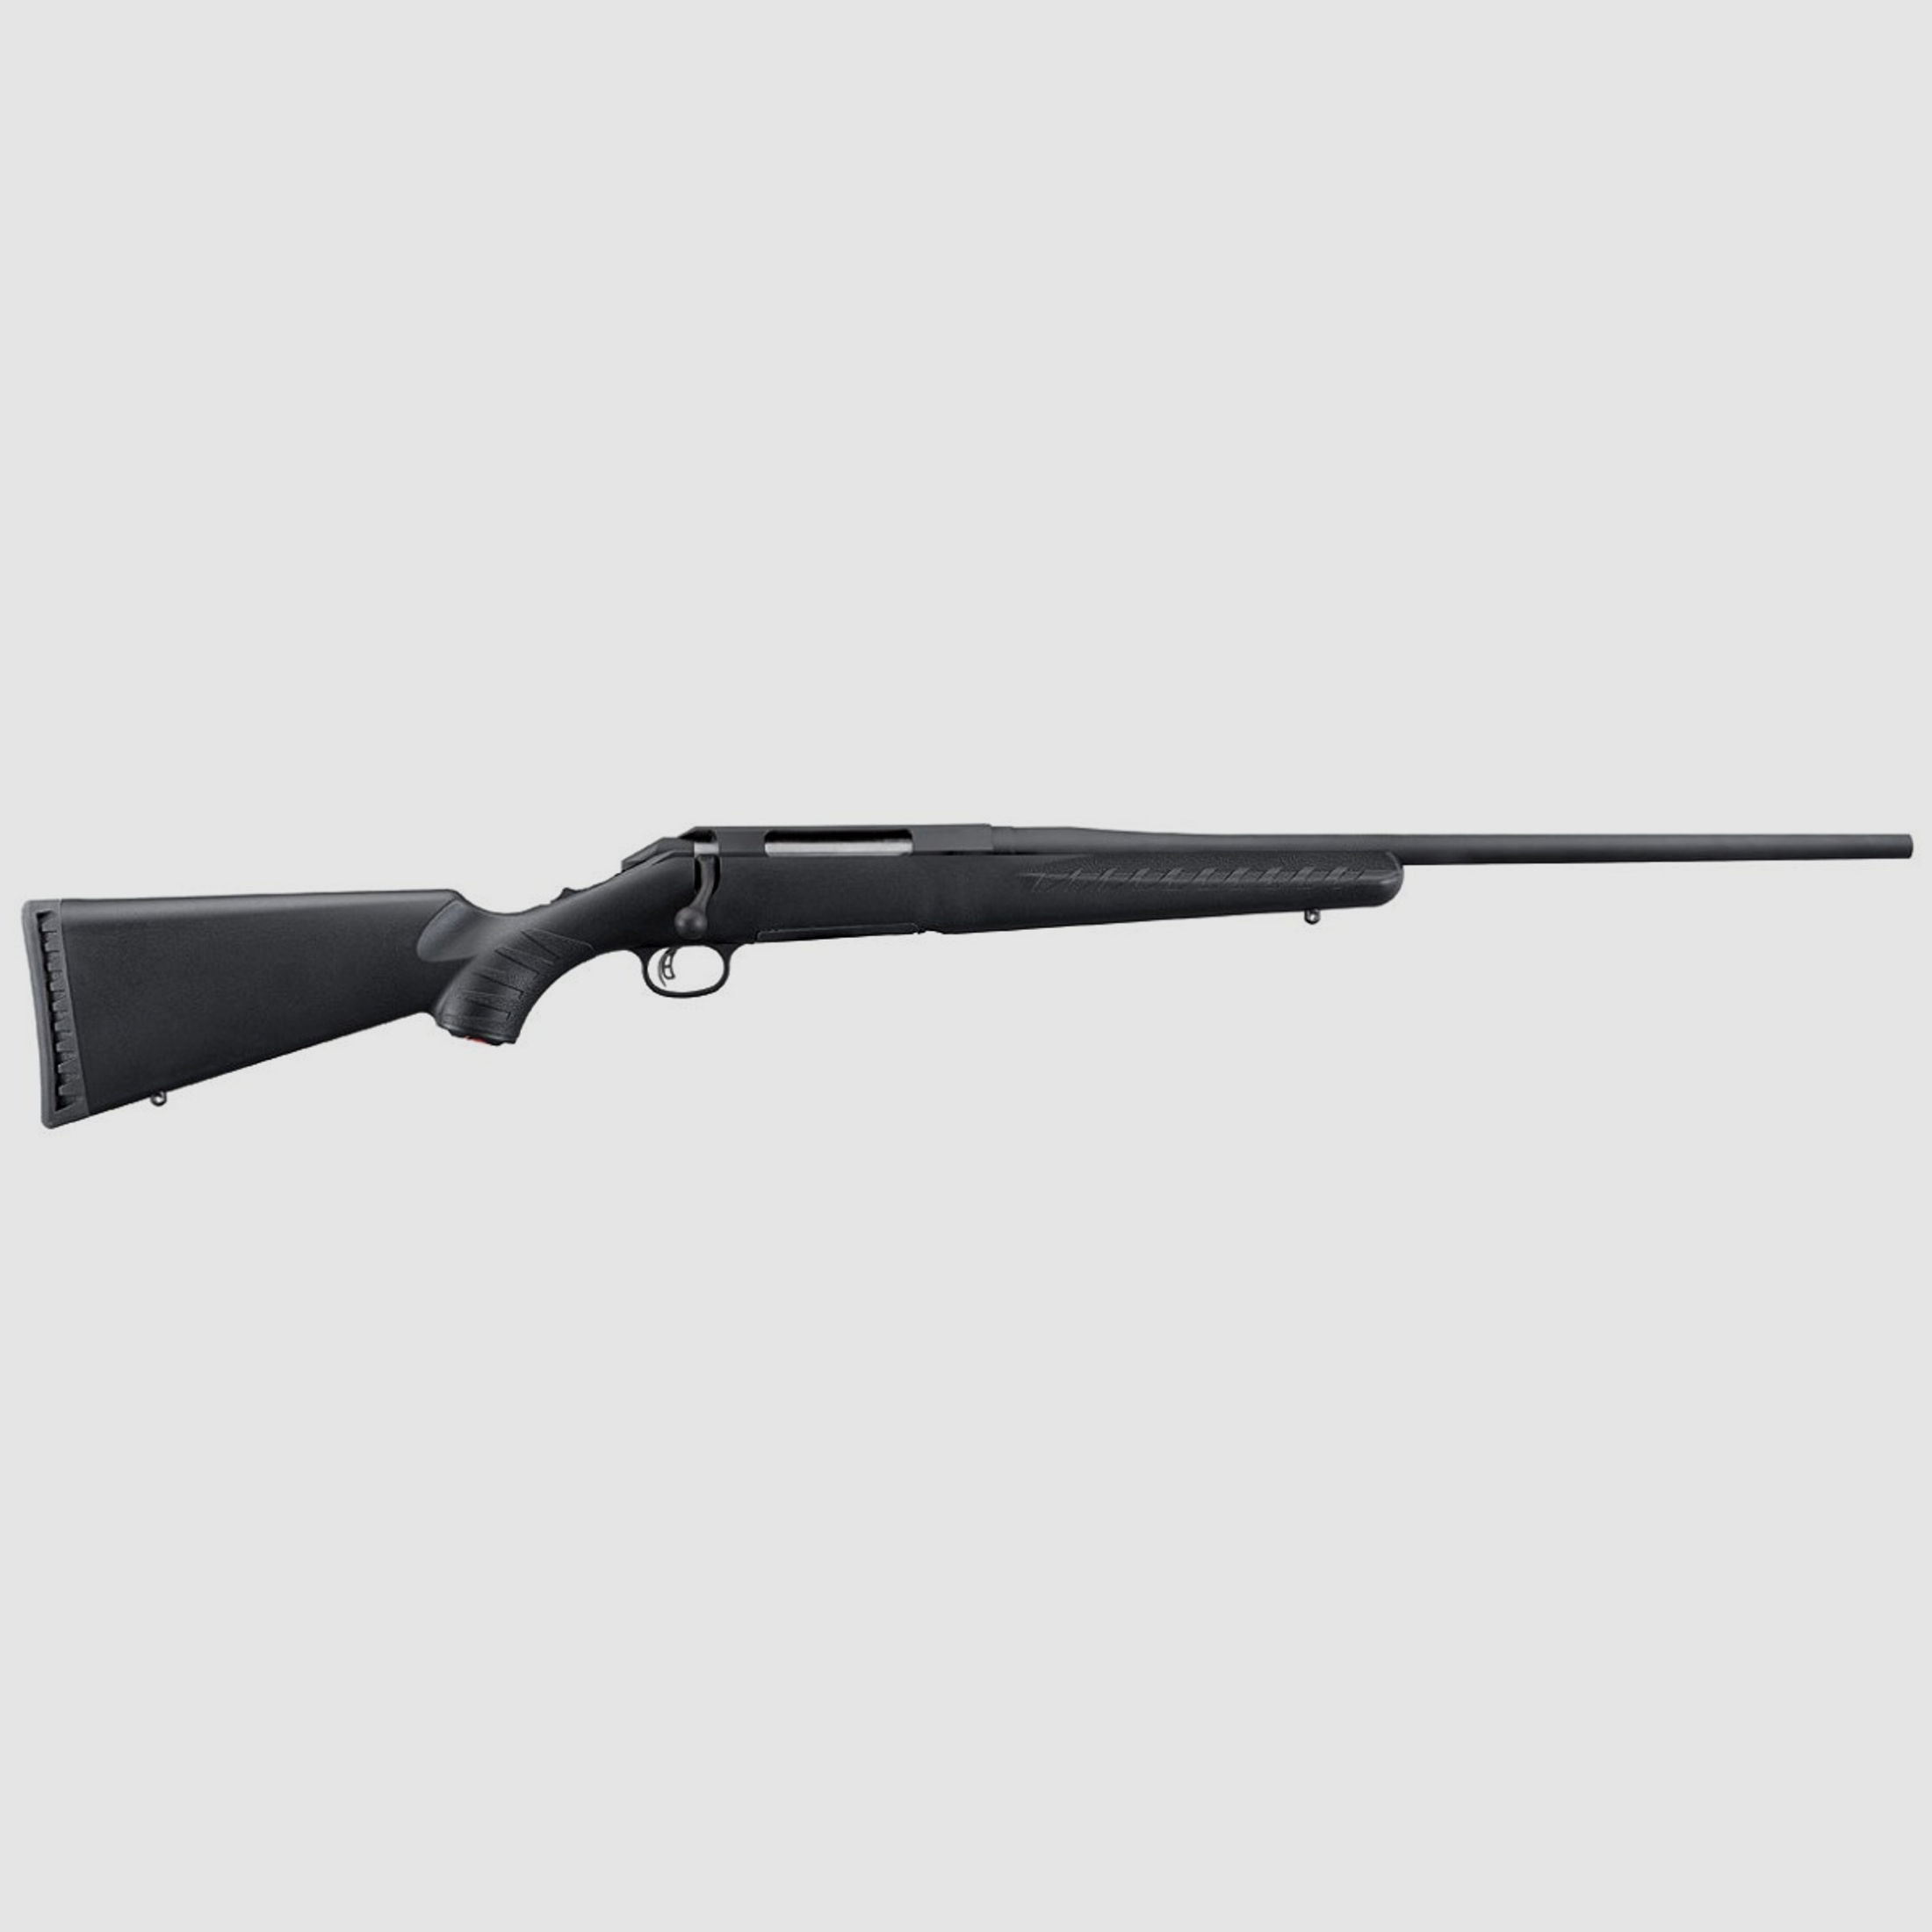 RUGER AMERICAN-RIFLE R2 7mm-08